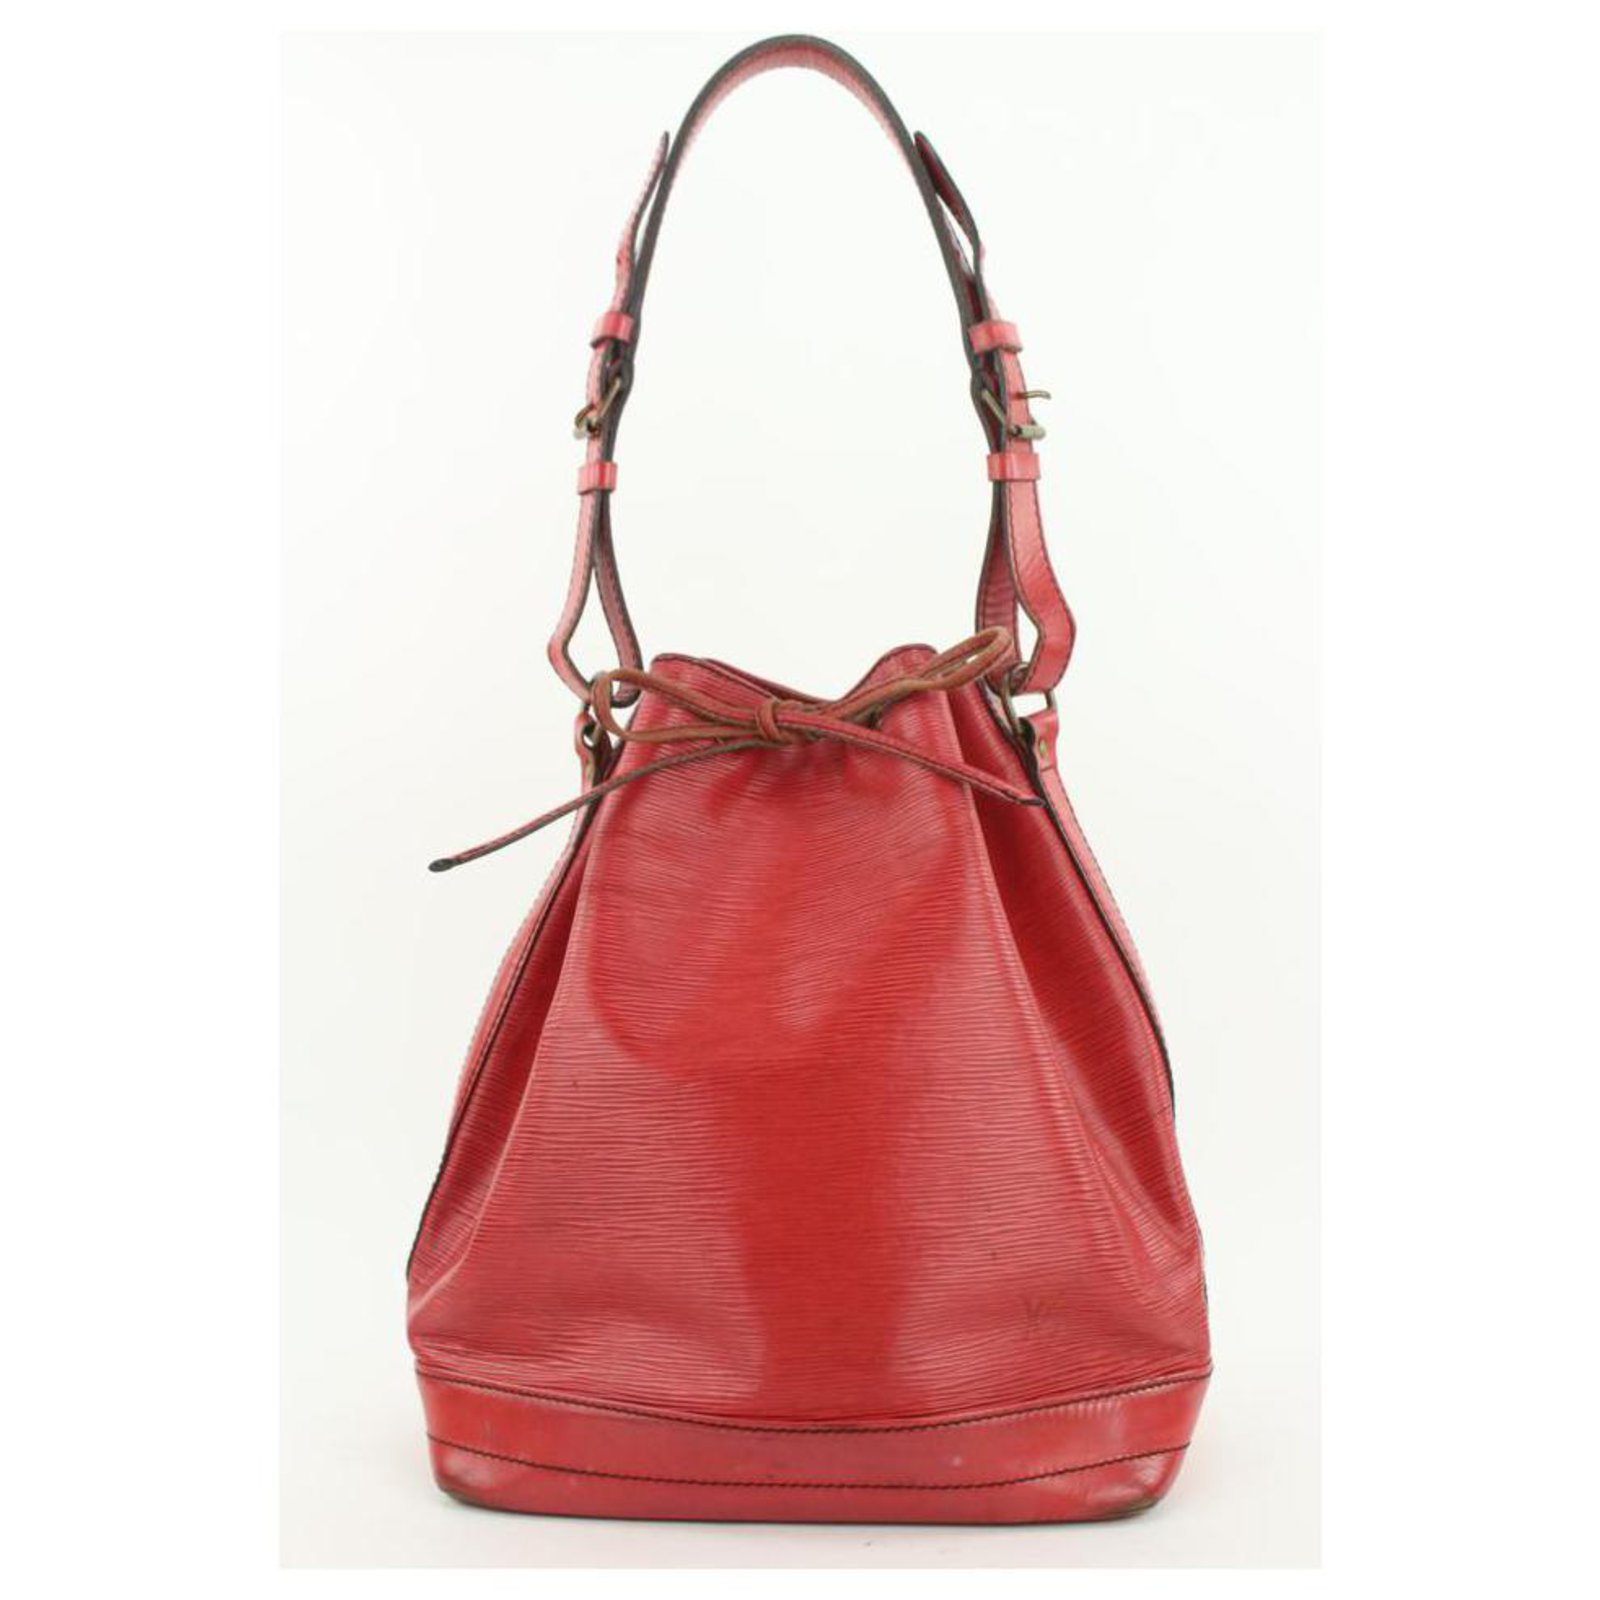 Louis Vuitton Noe GM in red Epileather